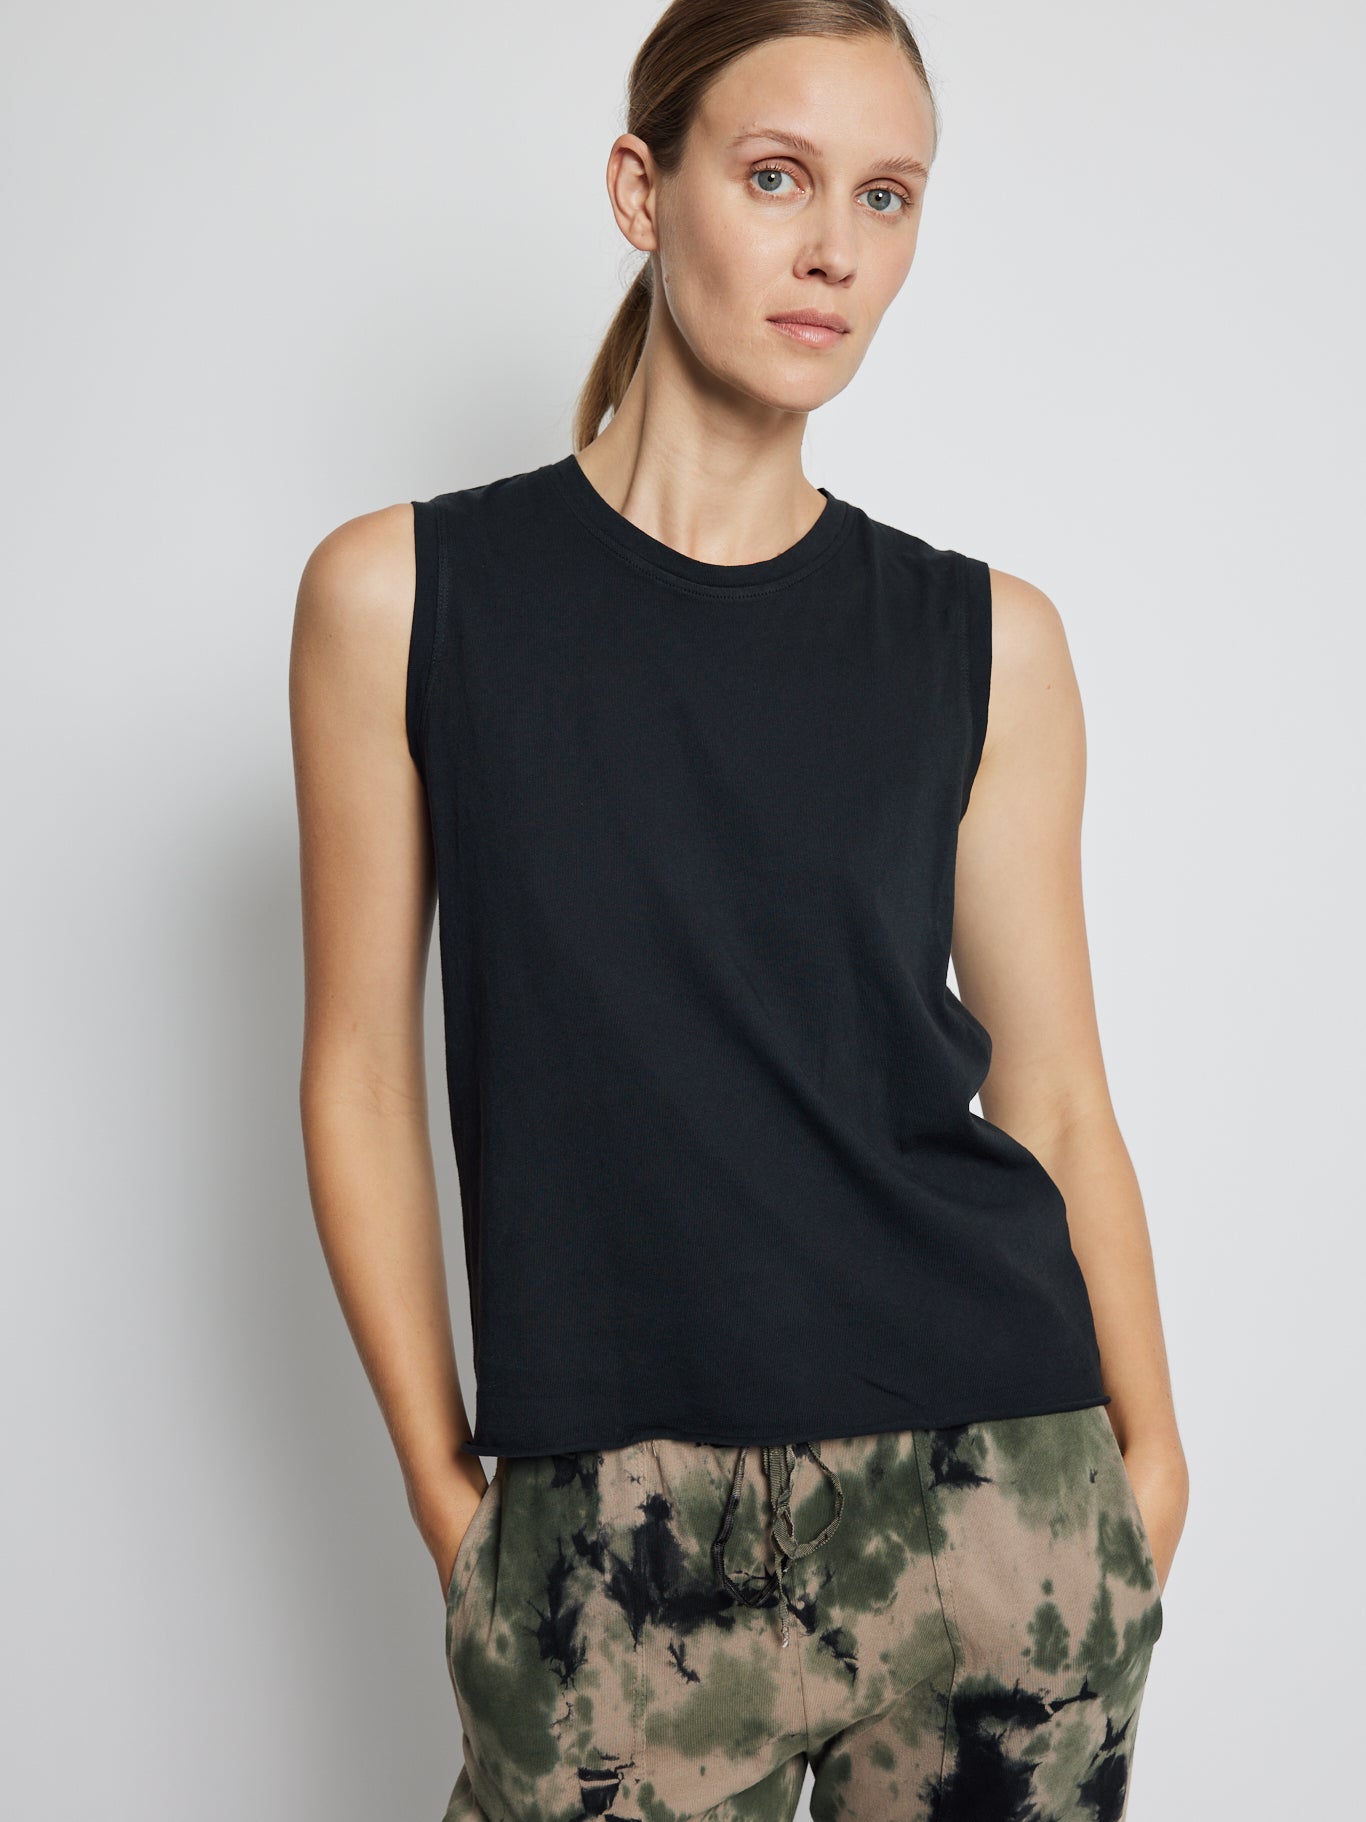 Pastel Black Classic Jersey Fitted Muscle – Raquel Allegra